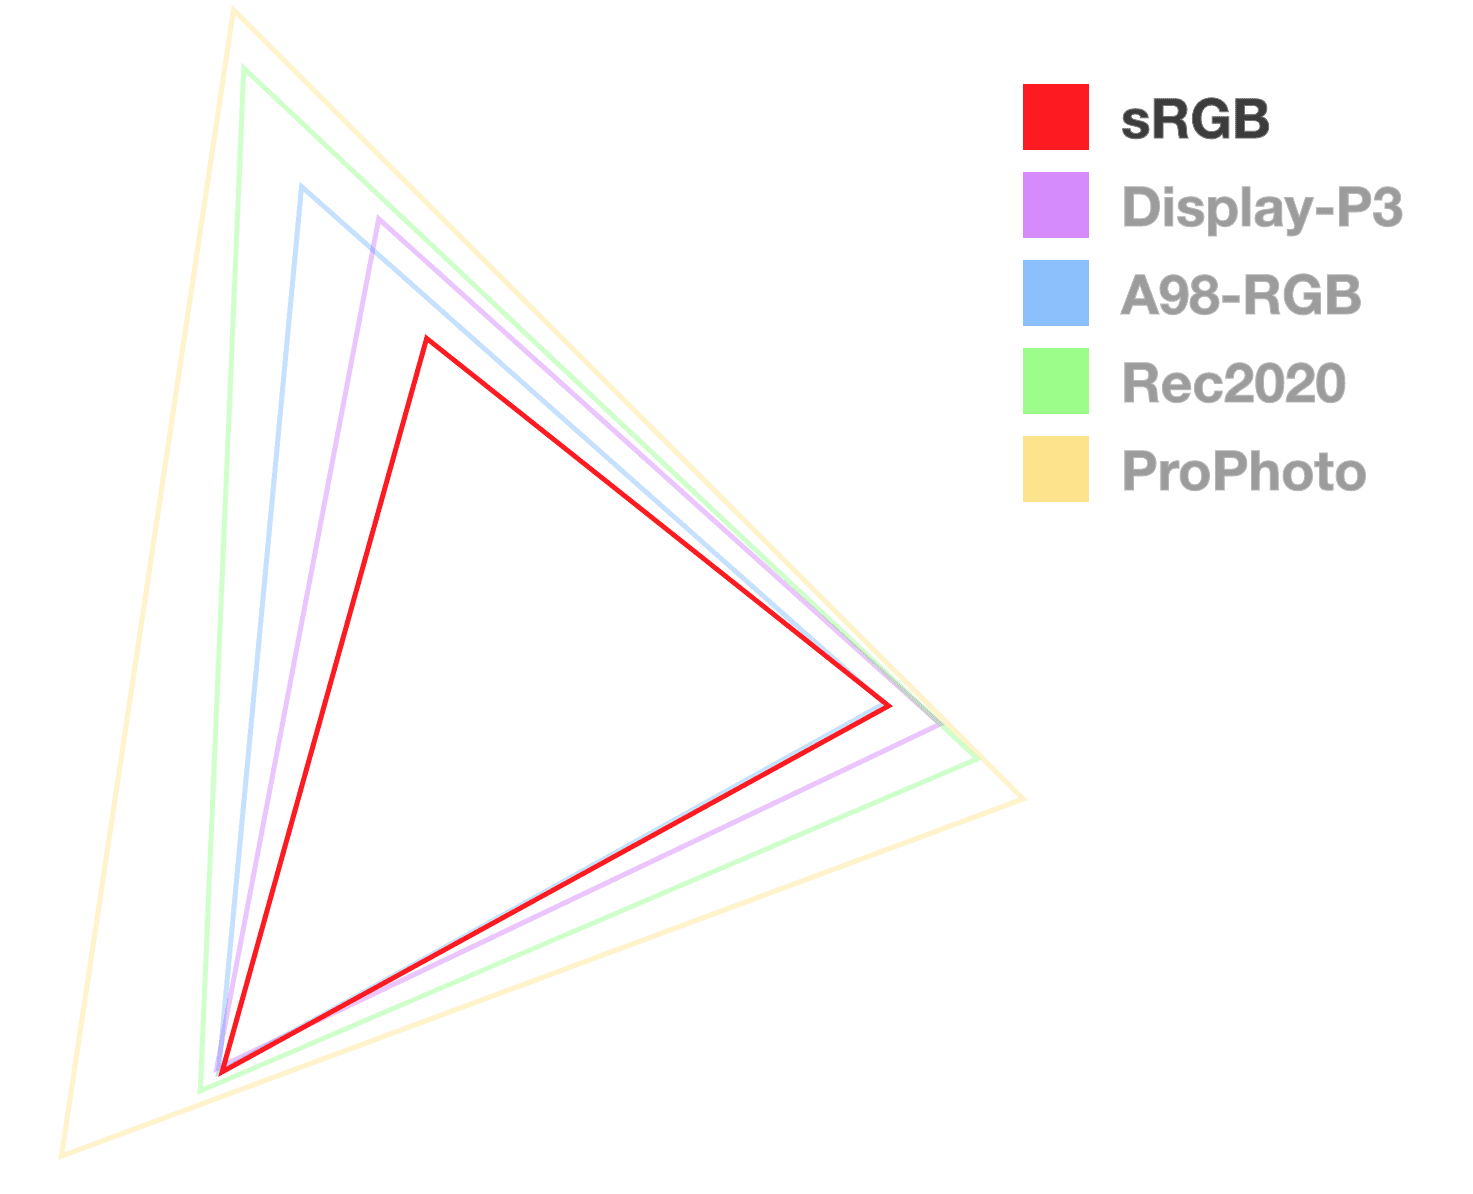 sRGB triangle is the only one fully opaque, to help visualize the size of the gamut.